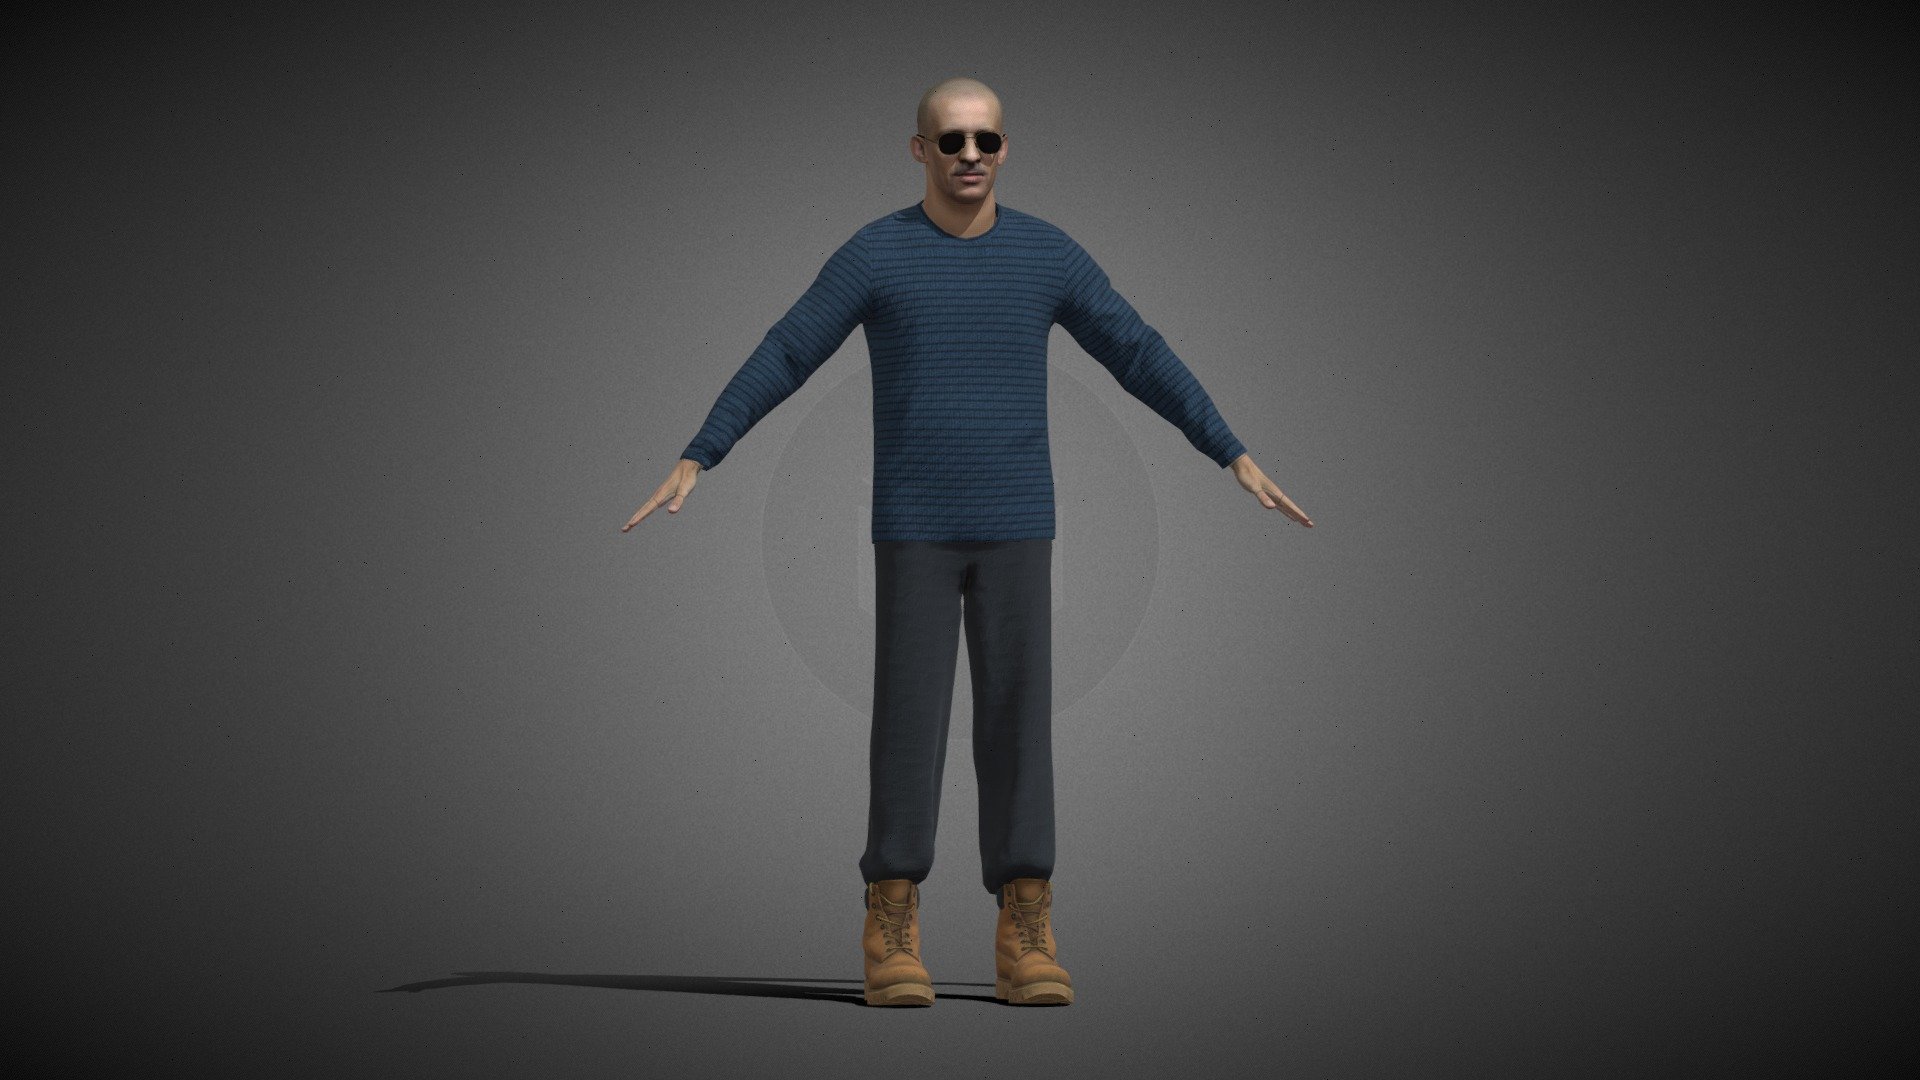 3D Model of Rim'K for our game Oktogone

I can create 3D models of all famous artists or custom characters.  You can send me a message on Instagram if you're interested &ndash;&gt; https://www.instagram.com/valone.future/ - Rim'K - 3D model by ValOne 3d model